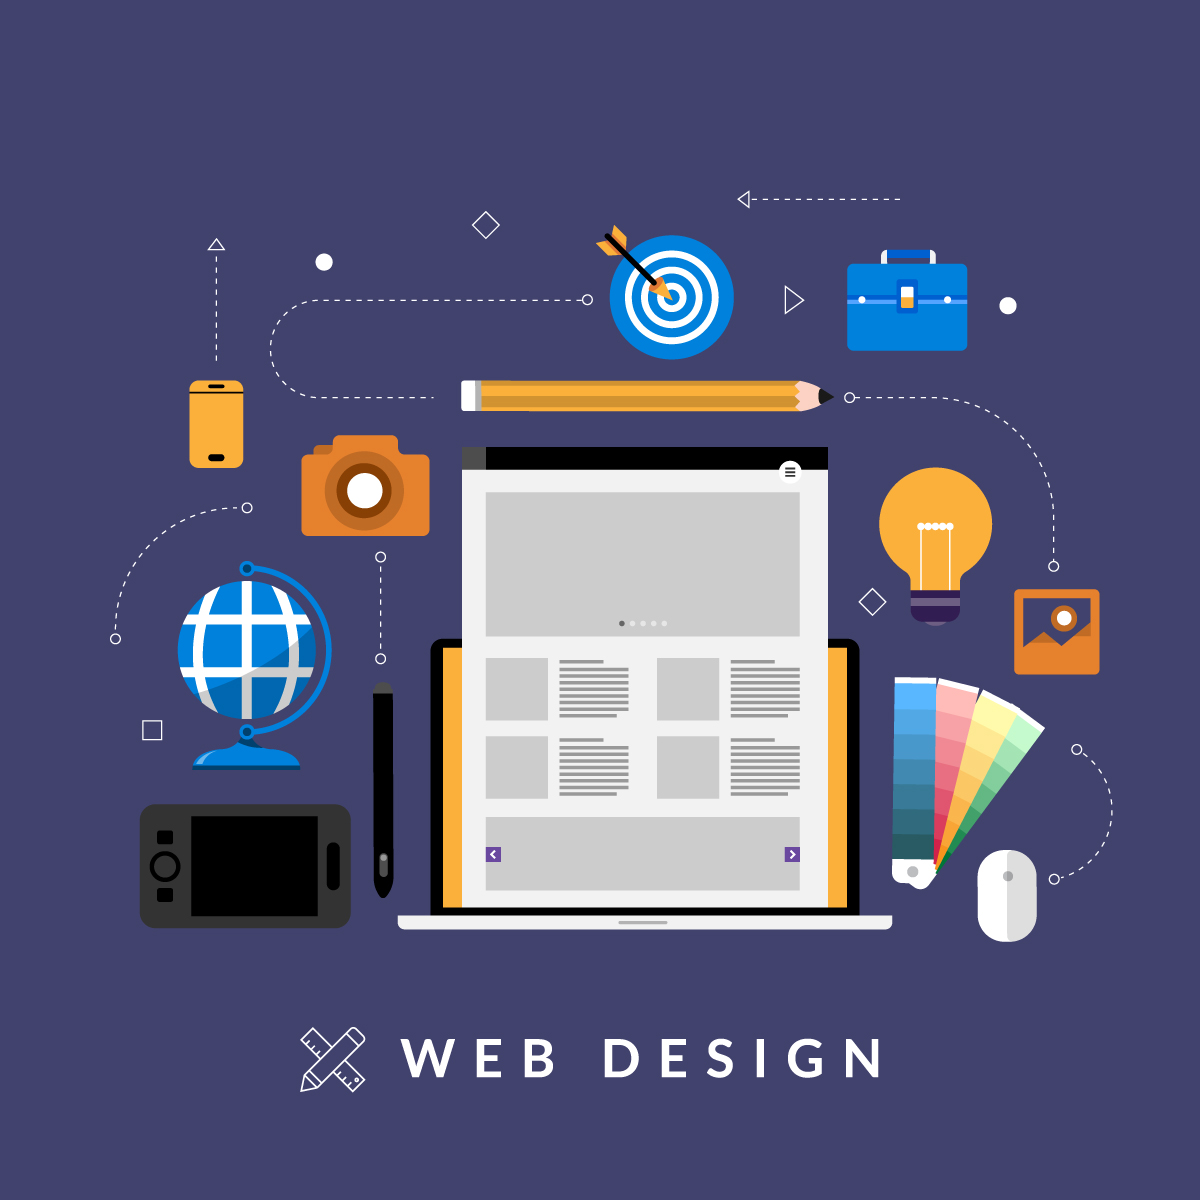 Website Design and SEO: 8 Design Tips to Get a Better Ranking